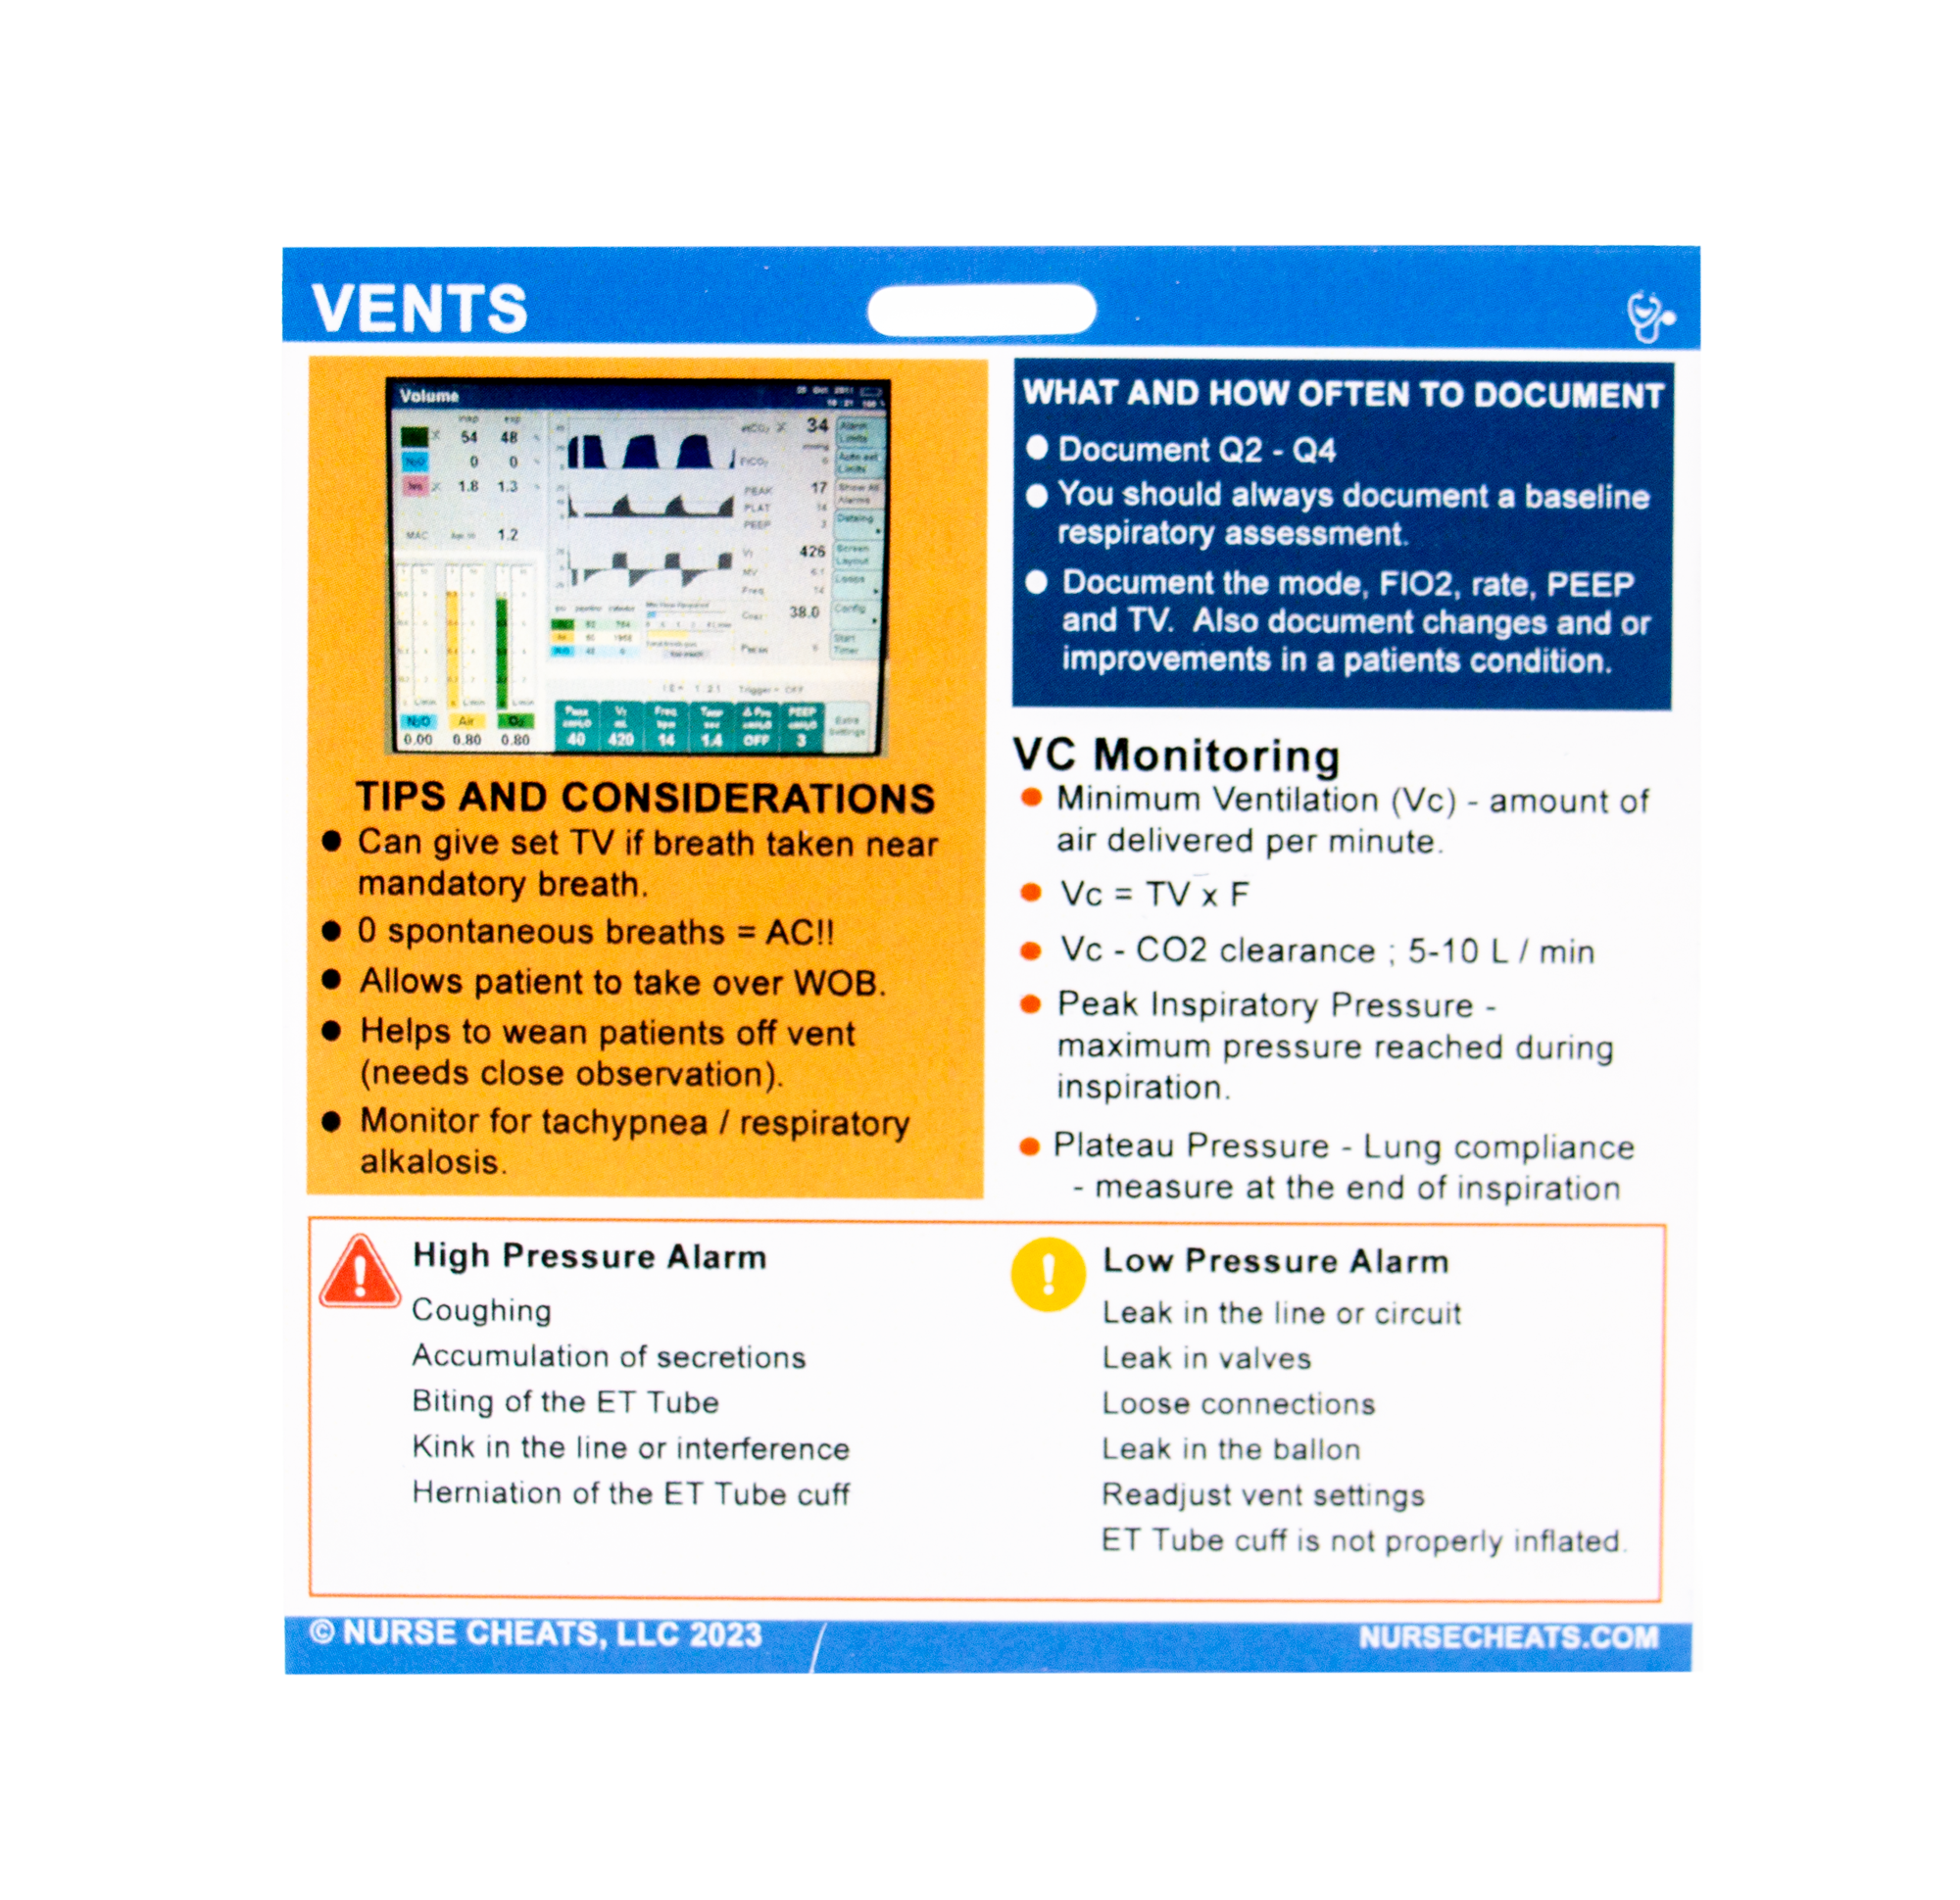 Our Vents badge for inpatient nurses is a critical badge to have if you work anywhere there are bi-paps and ventilation.  It contains necessary information including alarms, monitoring tips and more.